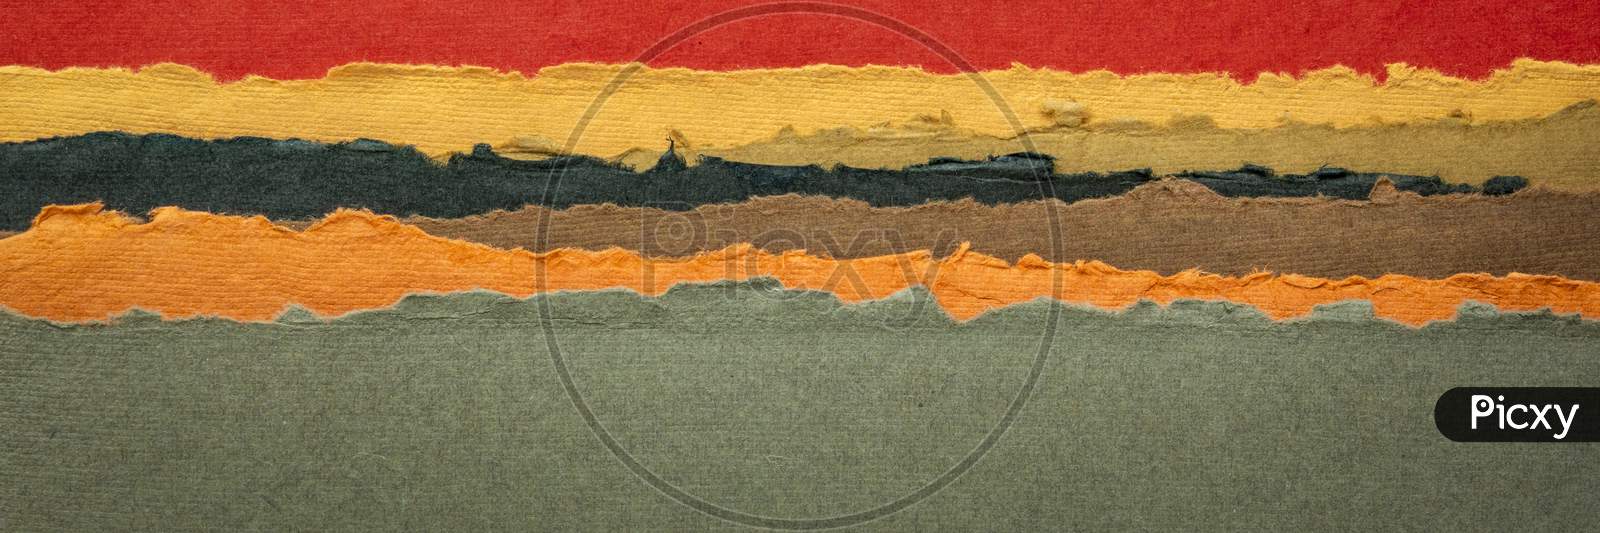 Red Sunset Or Sunrise Panorama - Abstract Landscape In Red And Yellow Tones - A Collection Of Colorful Handmade Indian Papers Produced From Recycled Cotton Fabric